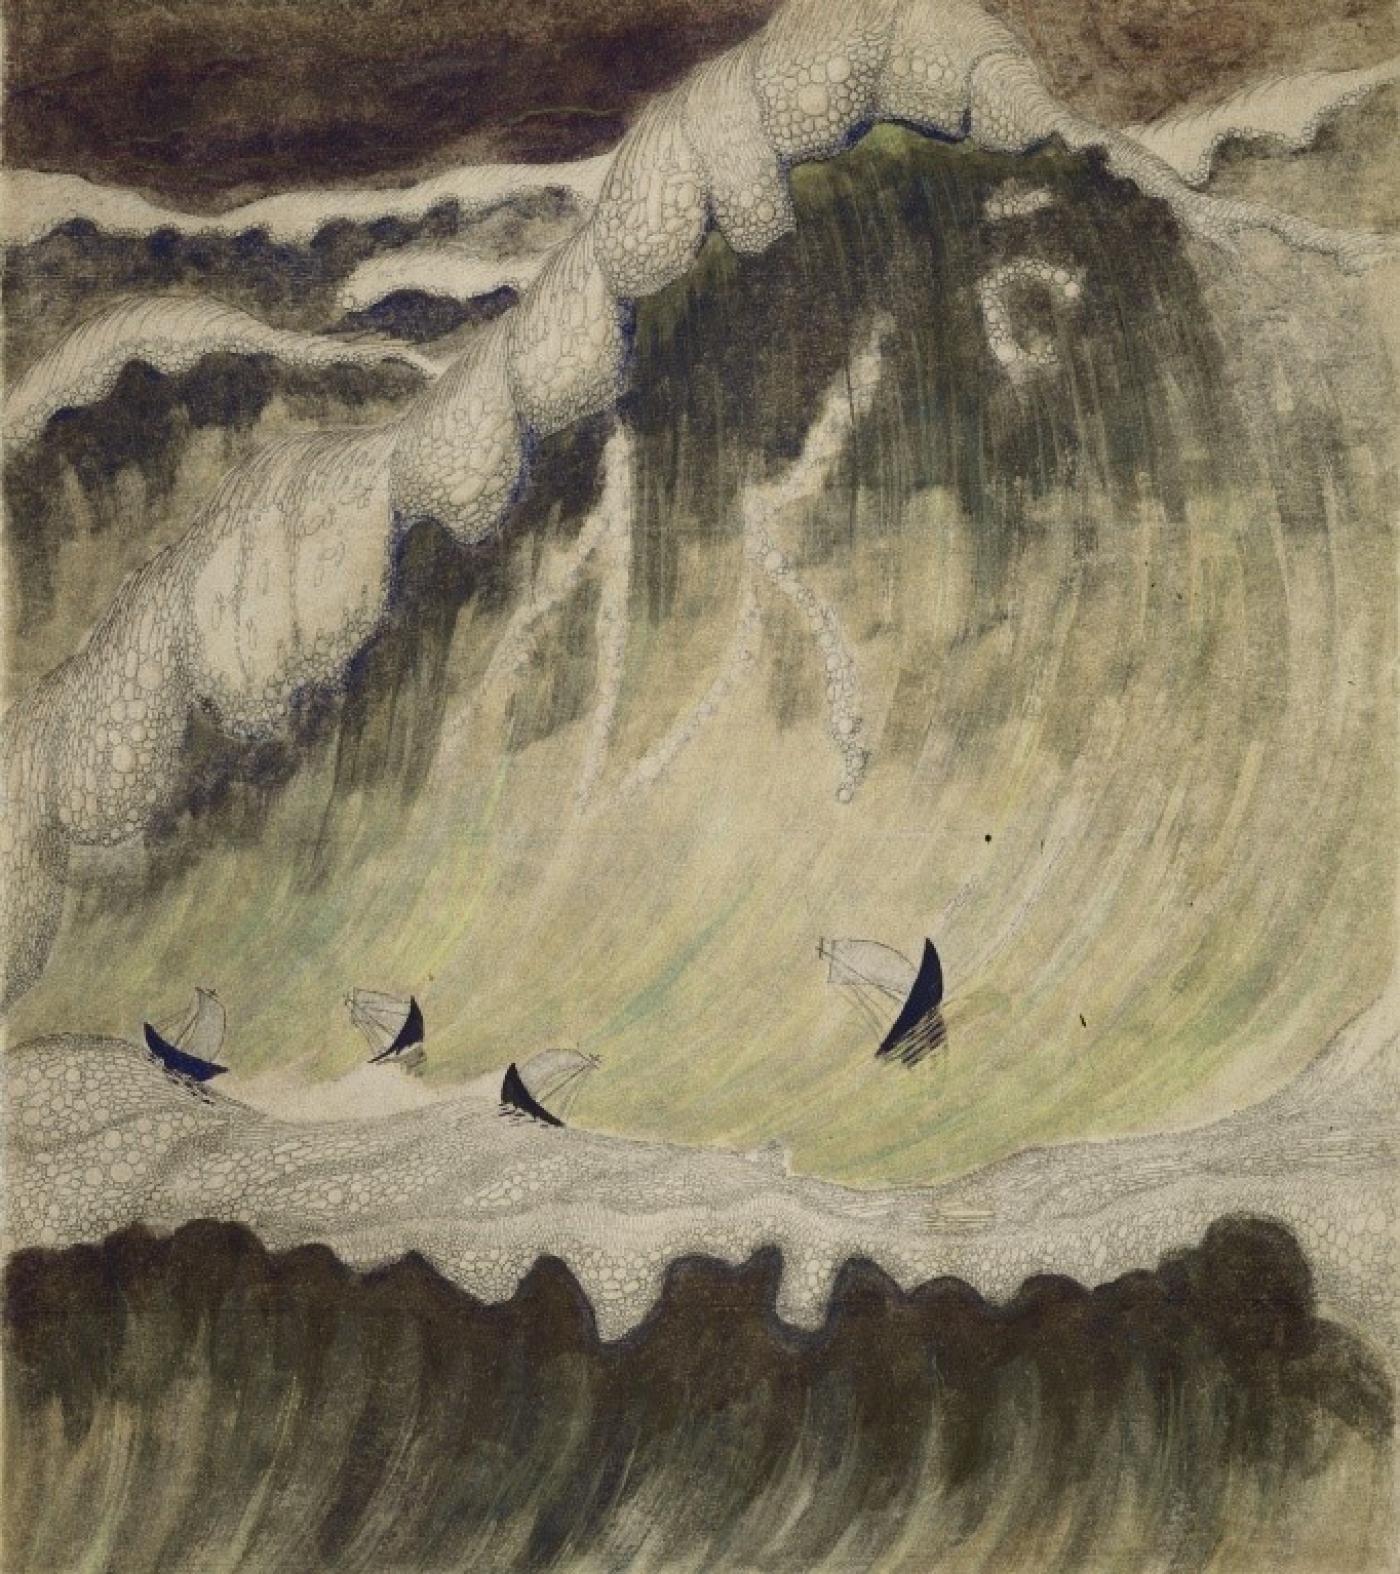 Sonata of the Sea: Finale, a 1908 painting by Čiurlionis    